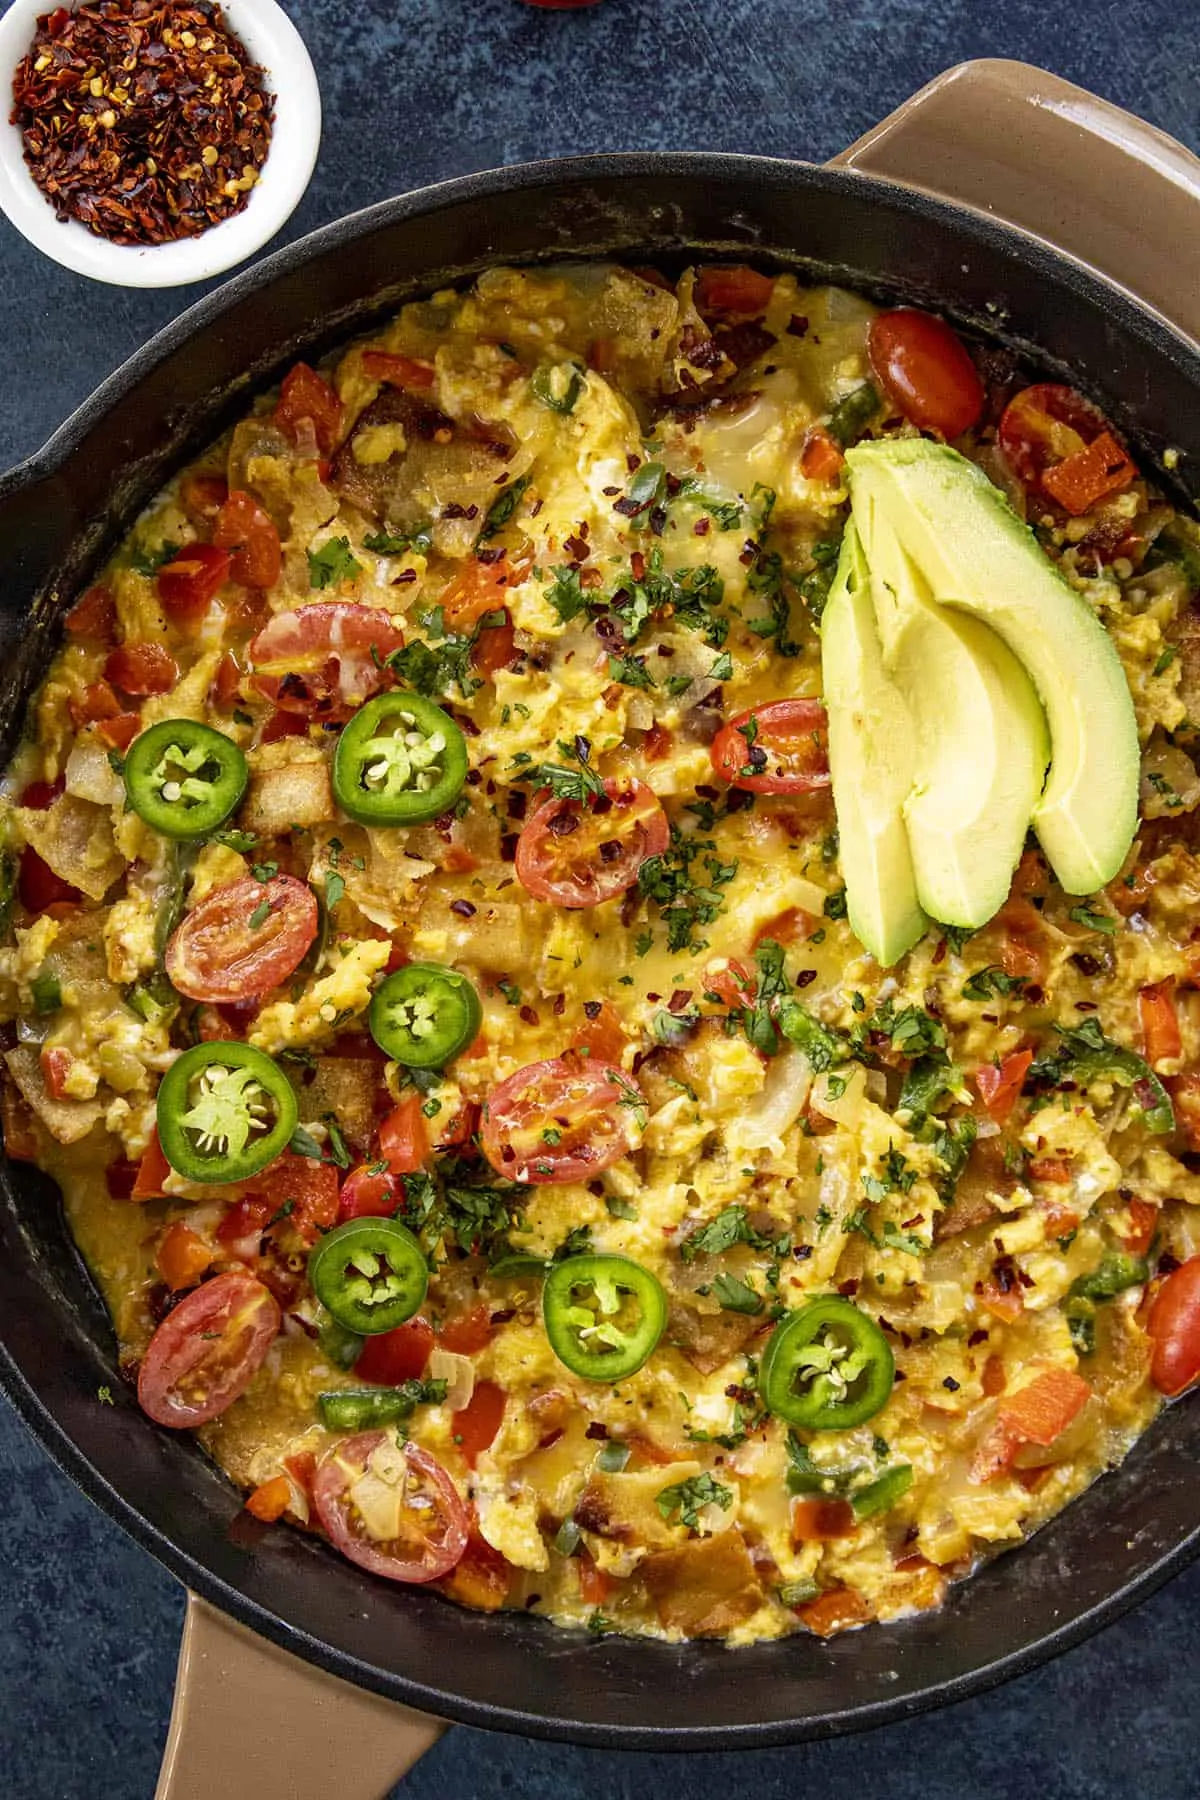 A big pan of Migas (Easy Mexican Scrambled Eggs with Crispy Tortillas), with avocado slices, sliced peppers, tomatoes and more